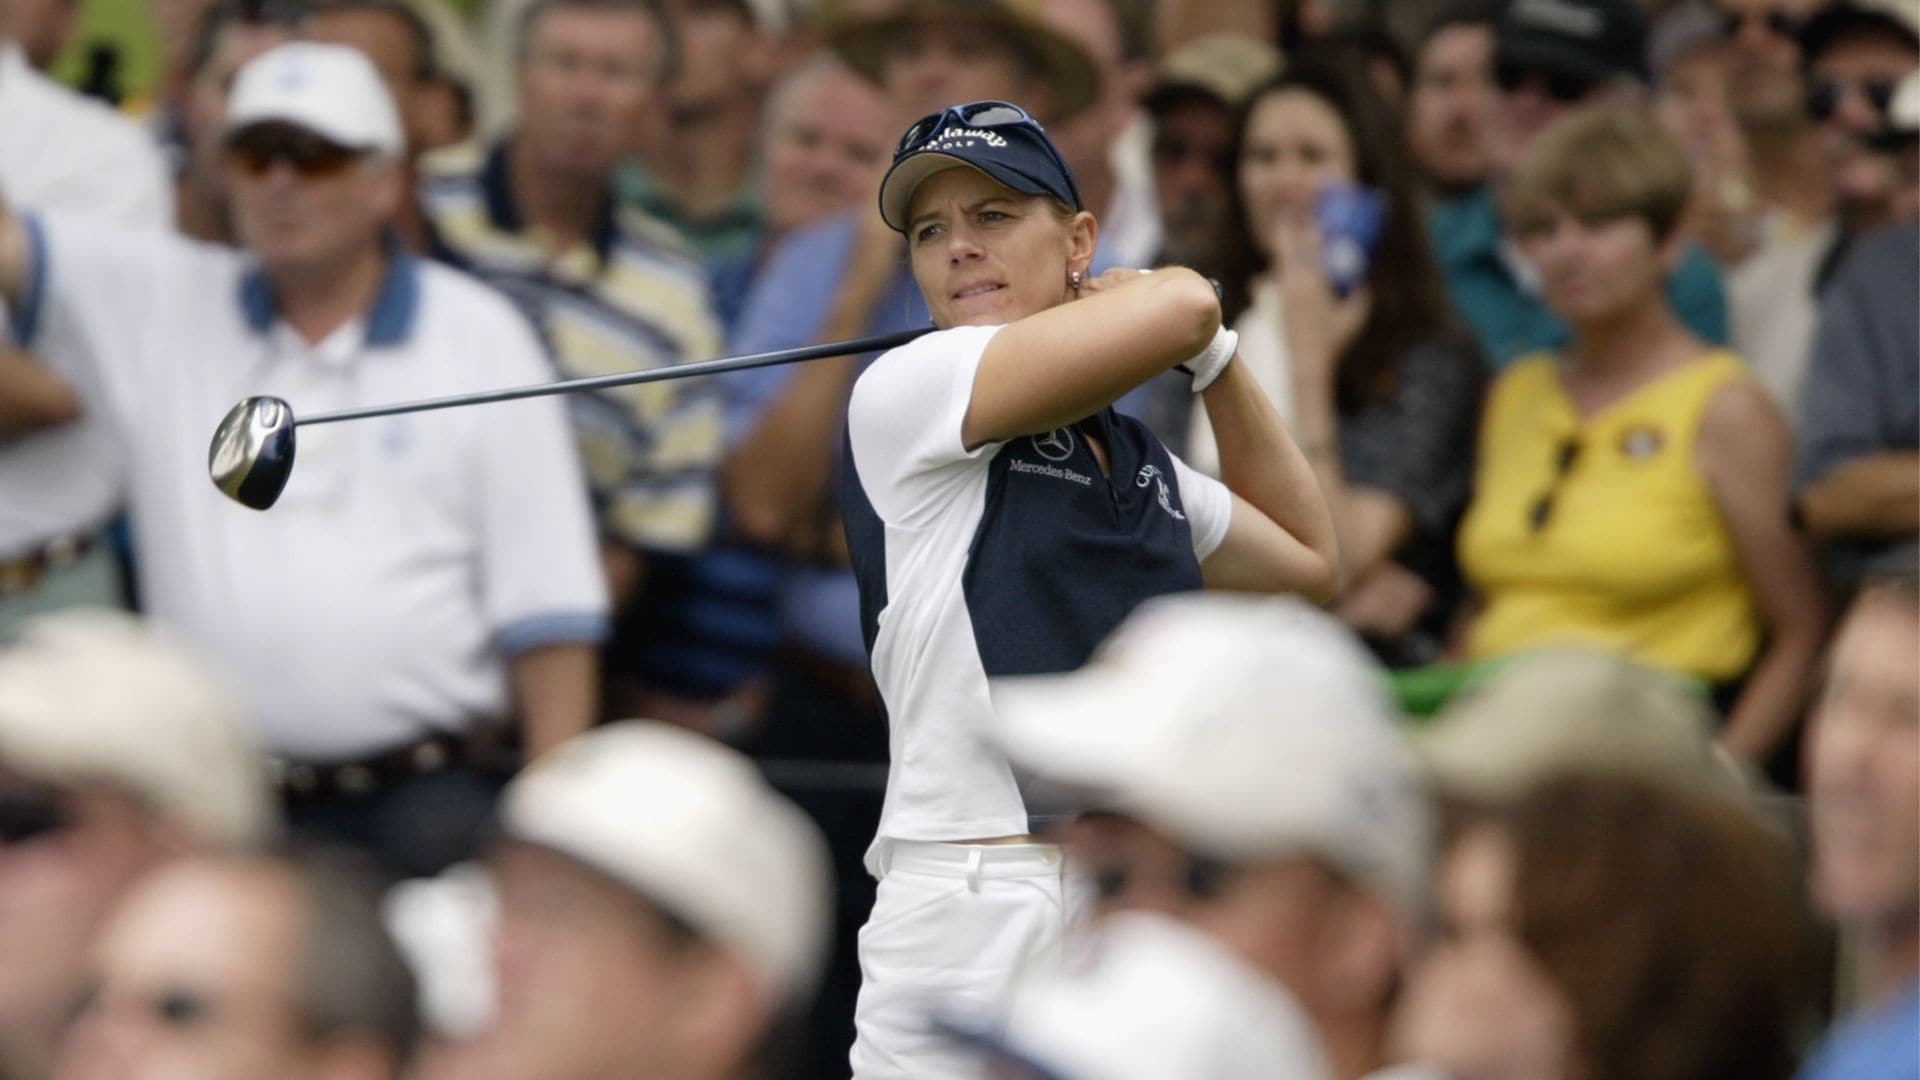 Twenty years since Annika and Colonial, could we see that in today’s game?